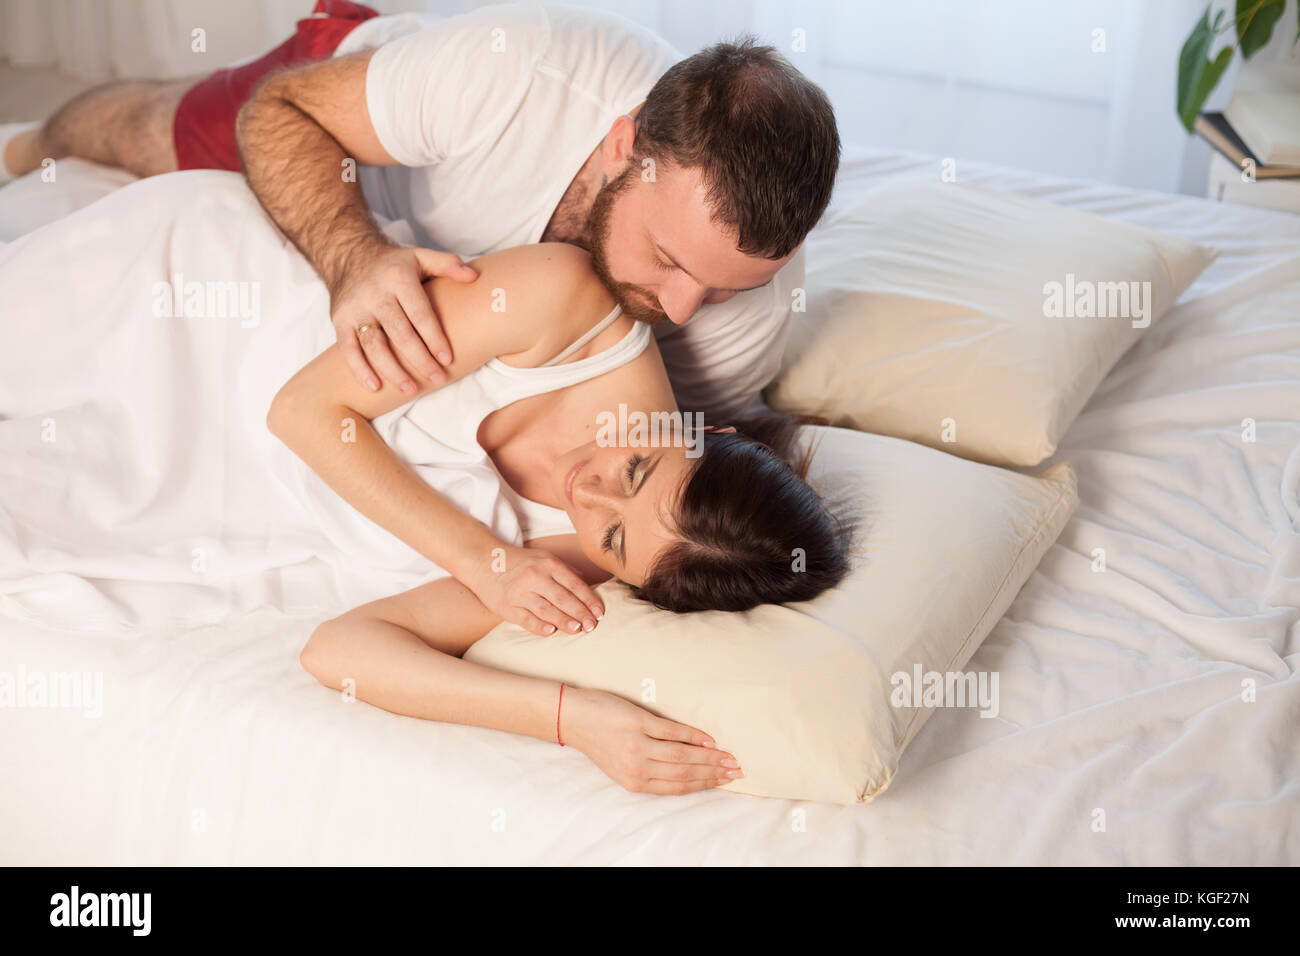 man wakes a woman in the bedroom in the morning weekend Stock Photo